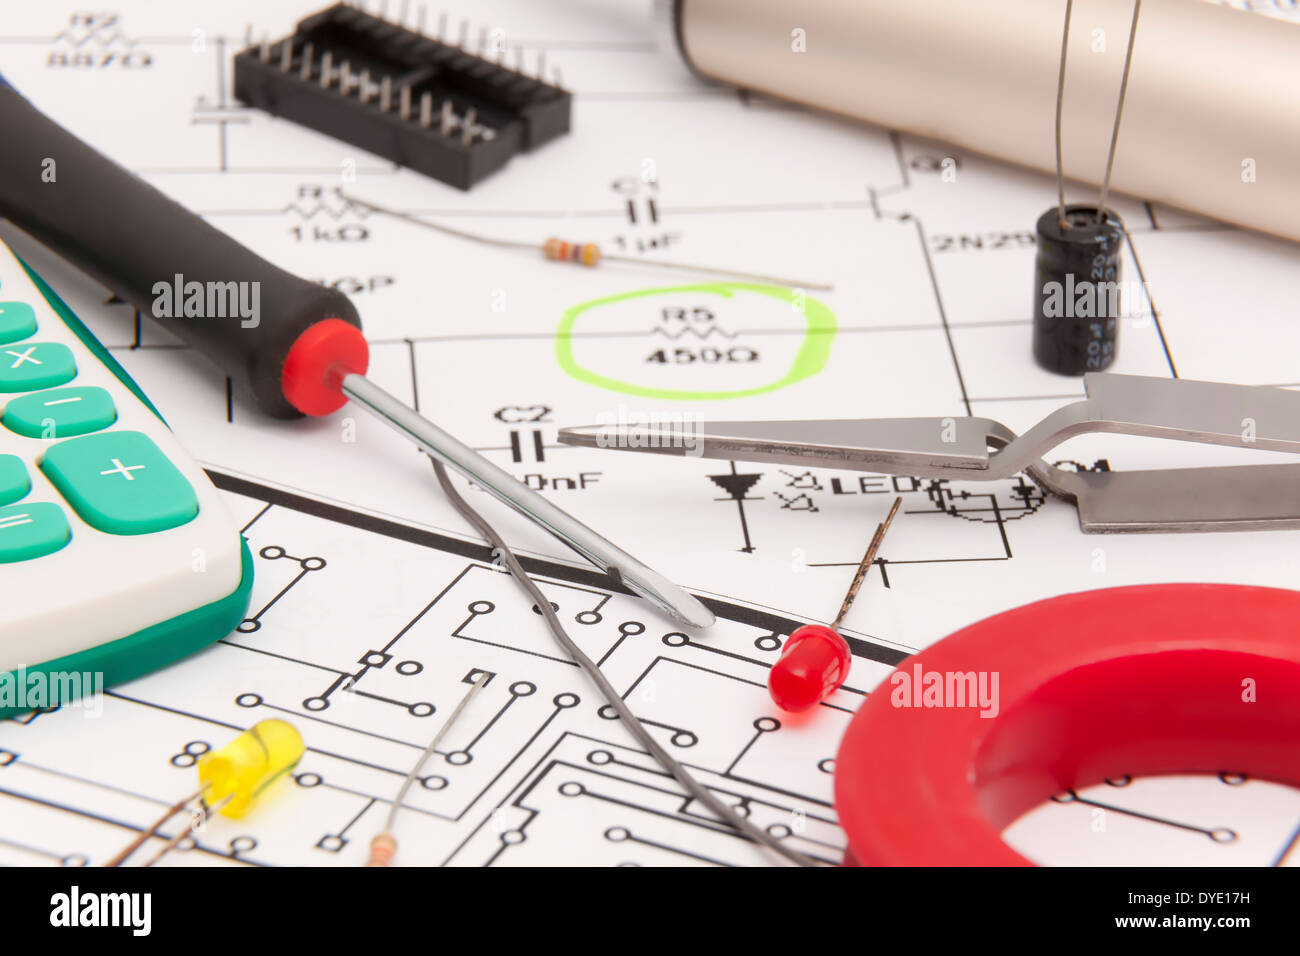 Design of electronic project Stock Photo